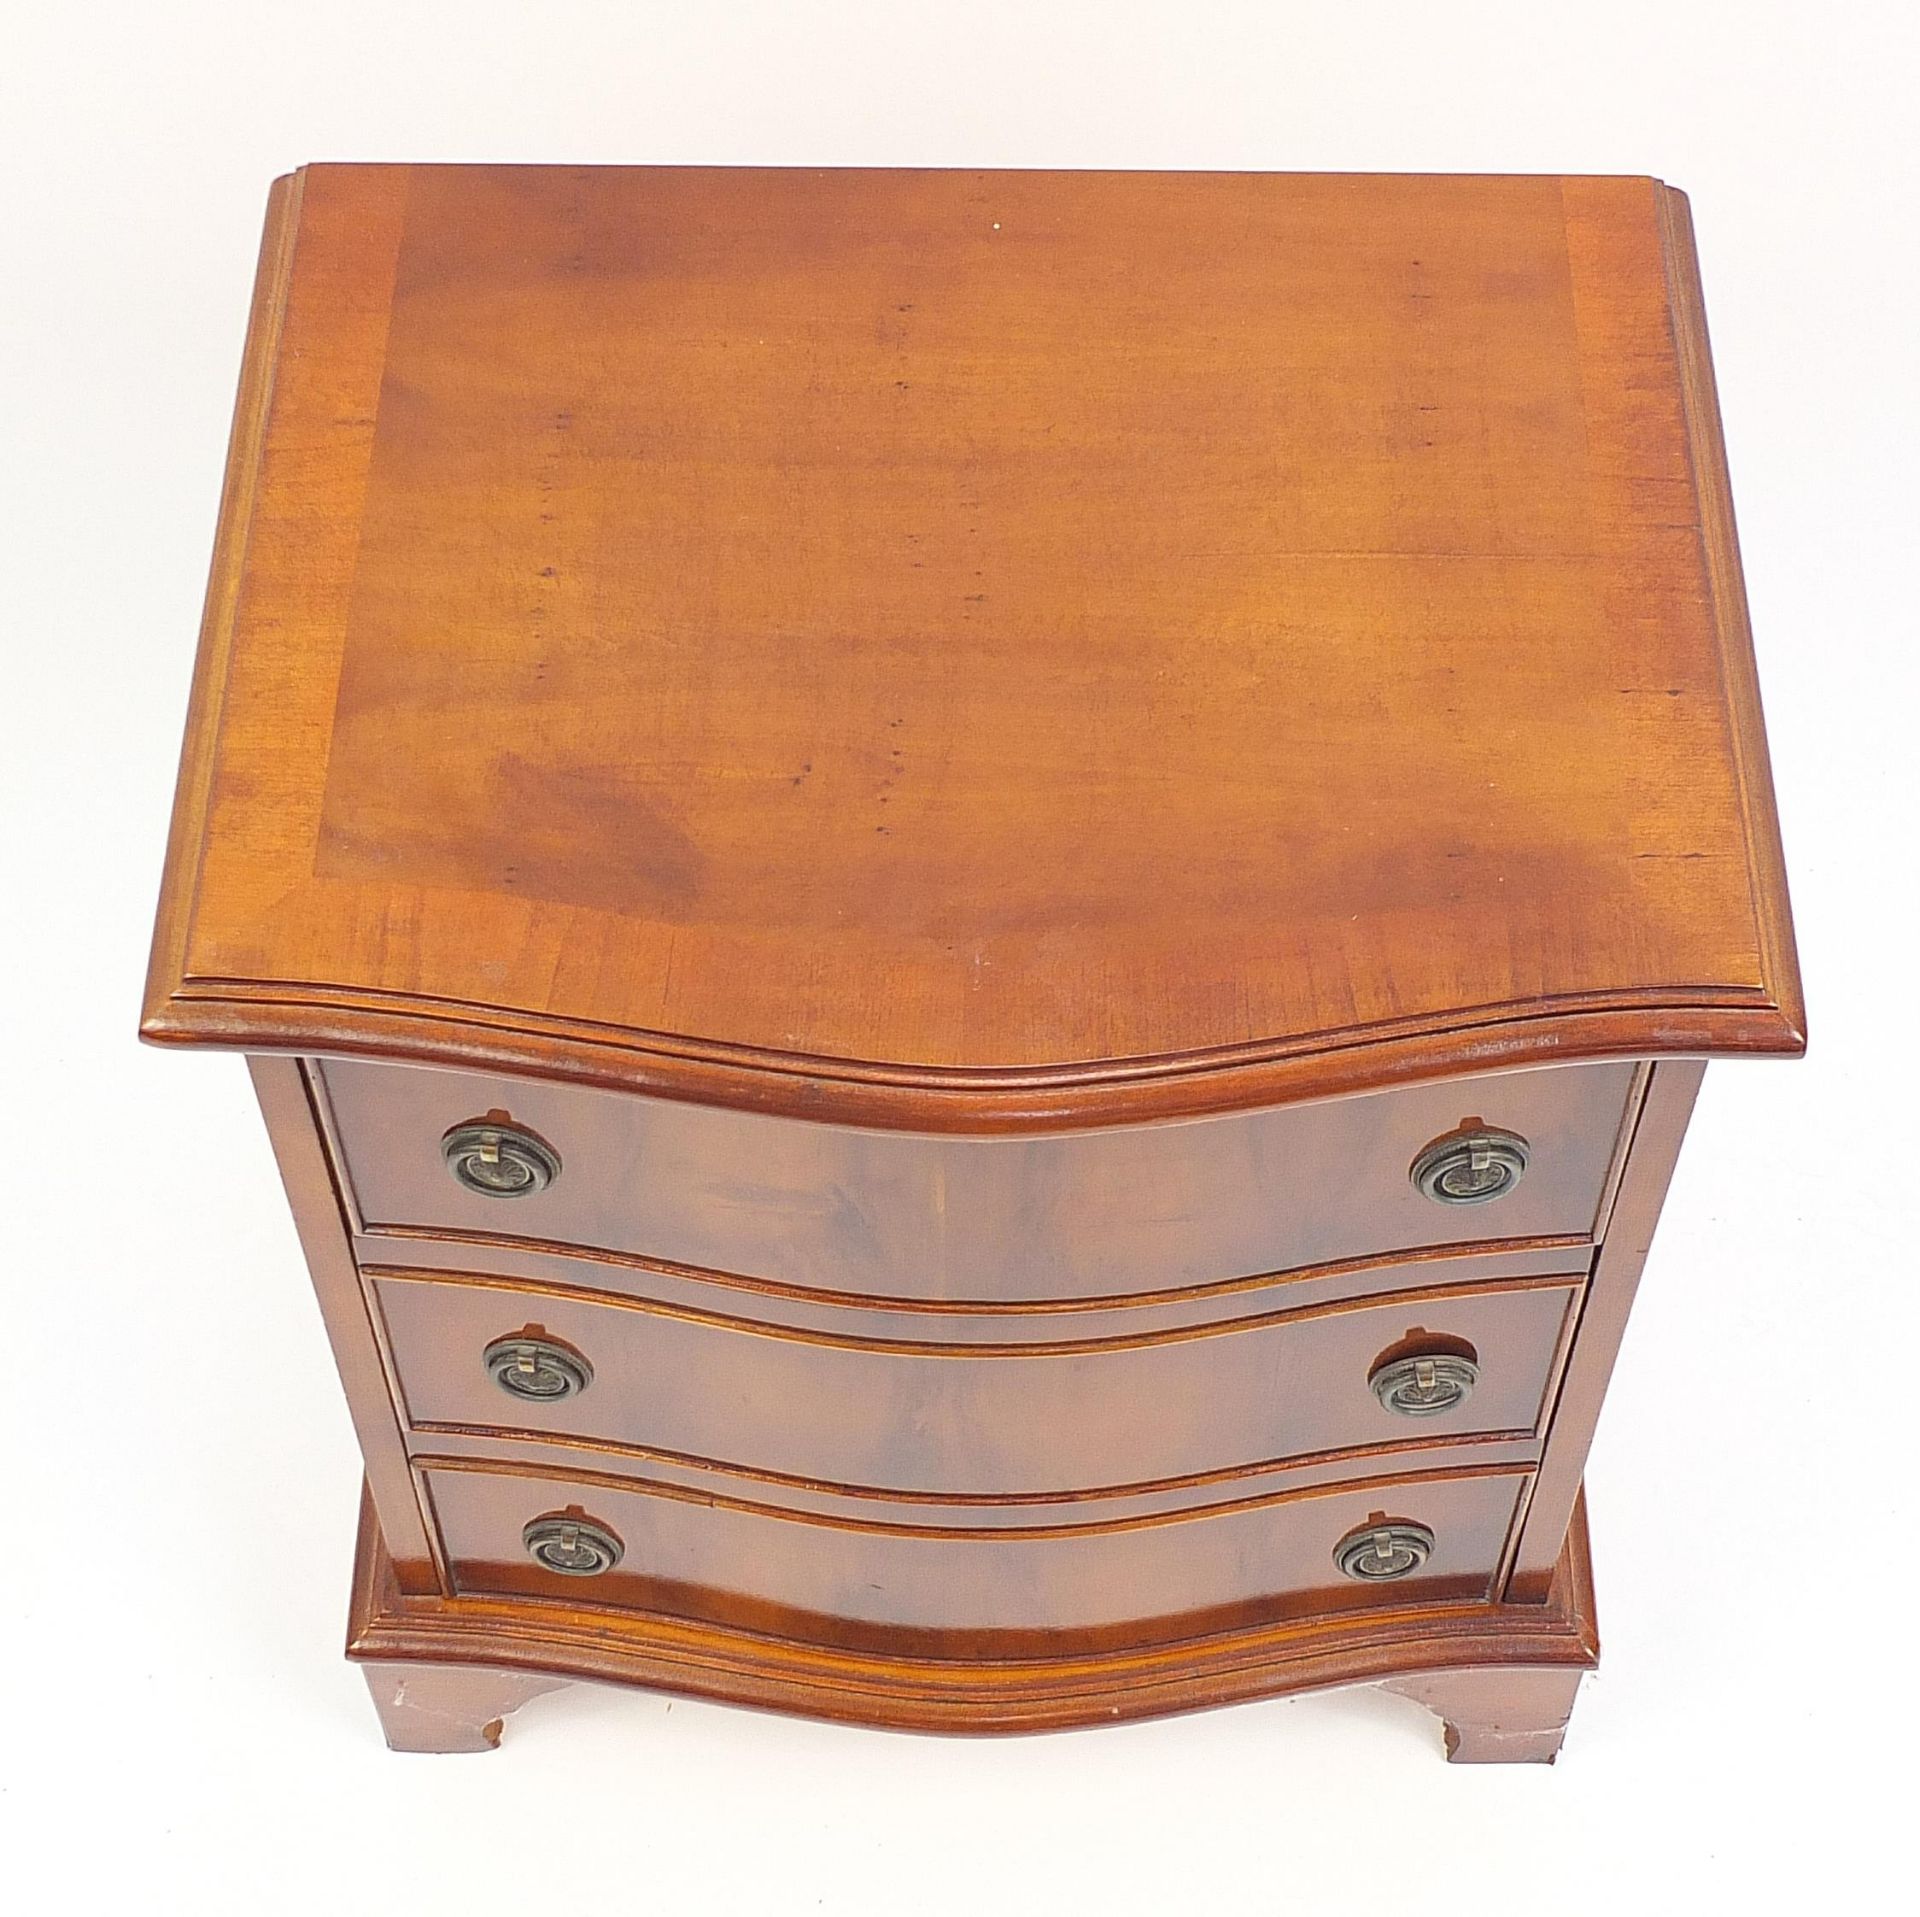 Cross banded yew wood three drawer chest with serpentine front, 57cm H x 50cm W x 39cm D - Image 3 of 4